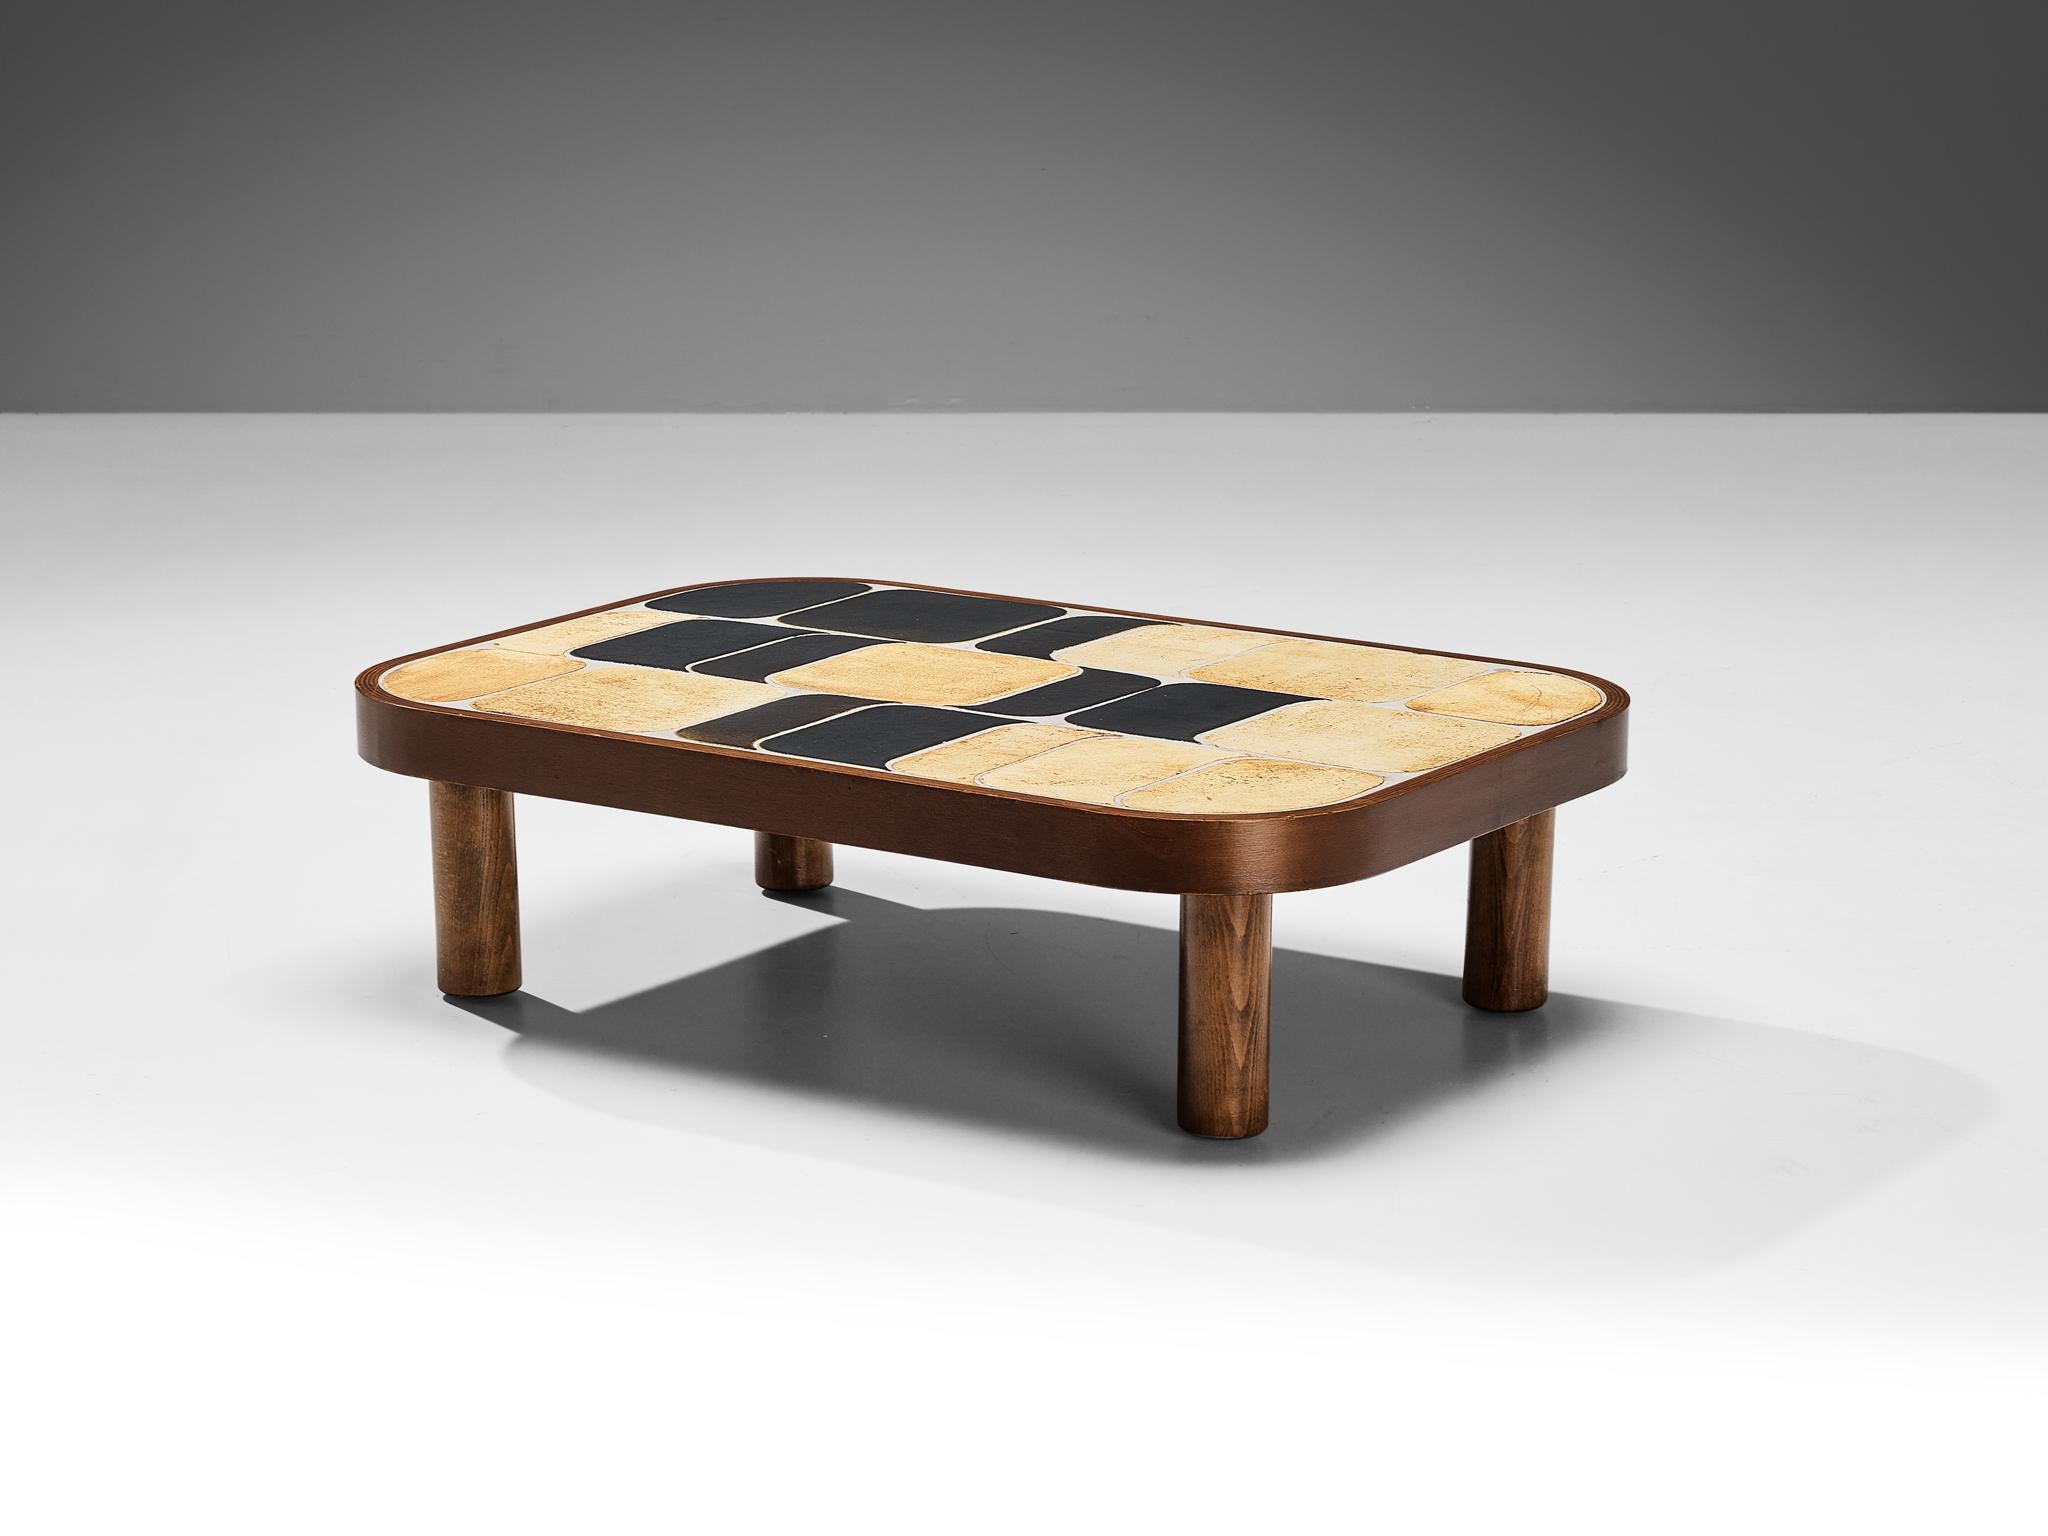 Roger Capron, coffee table, ceramic, stained mahogany, stained beech, France, 1960s.

French coffee table with wonderful composed ceramic tiles by French designer Roger Capron. Both the tiles as well as the frame feature rounded corners. The tiles